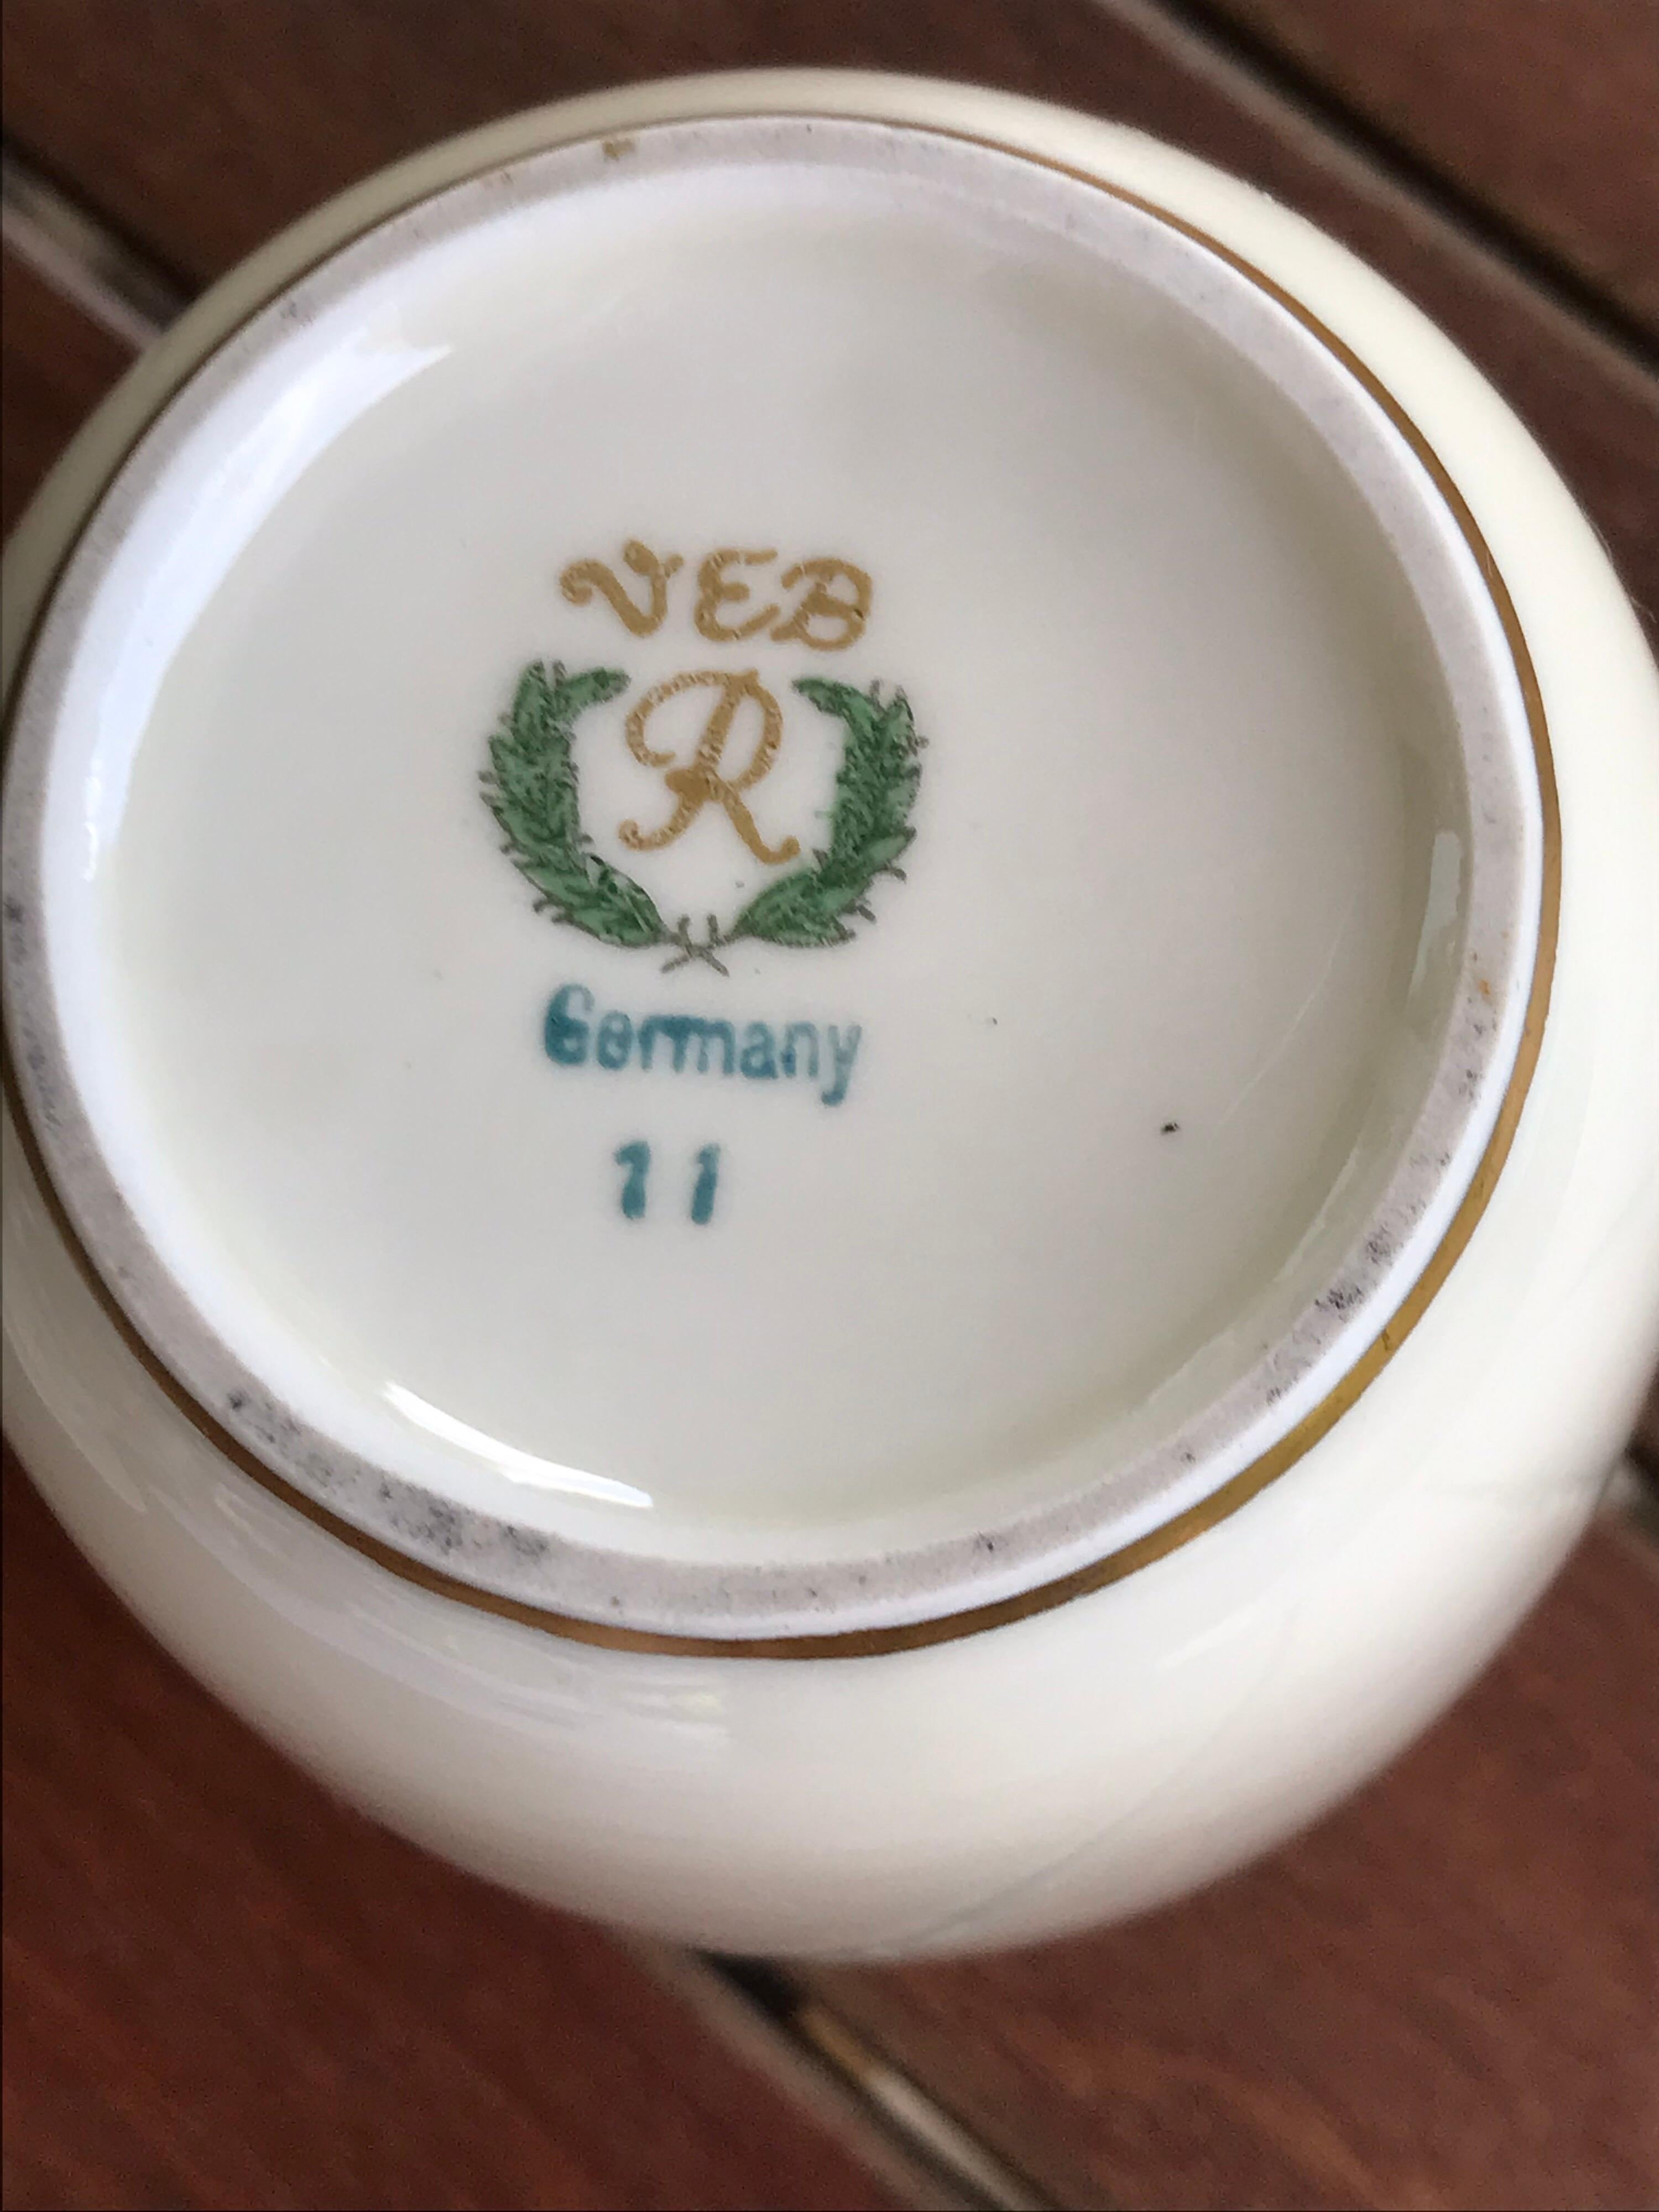 Used between 1969 and 1981, example of the previously shown mark in color but also stating 'GERMANY'.
The company was nationalized in 1968 and at first became a branch of the V.E.B. Porzellankombinat Kahla which ran the Reichenbach factory under